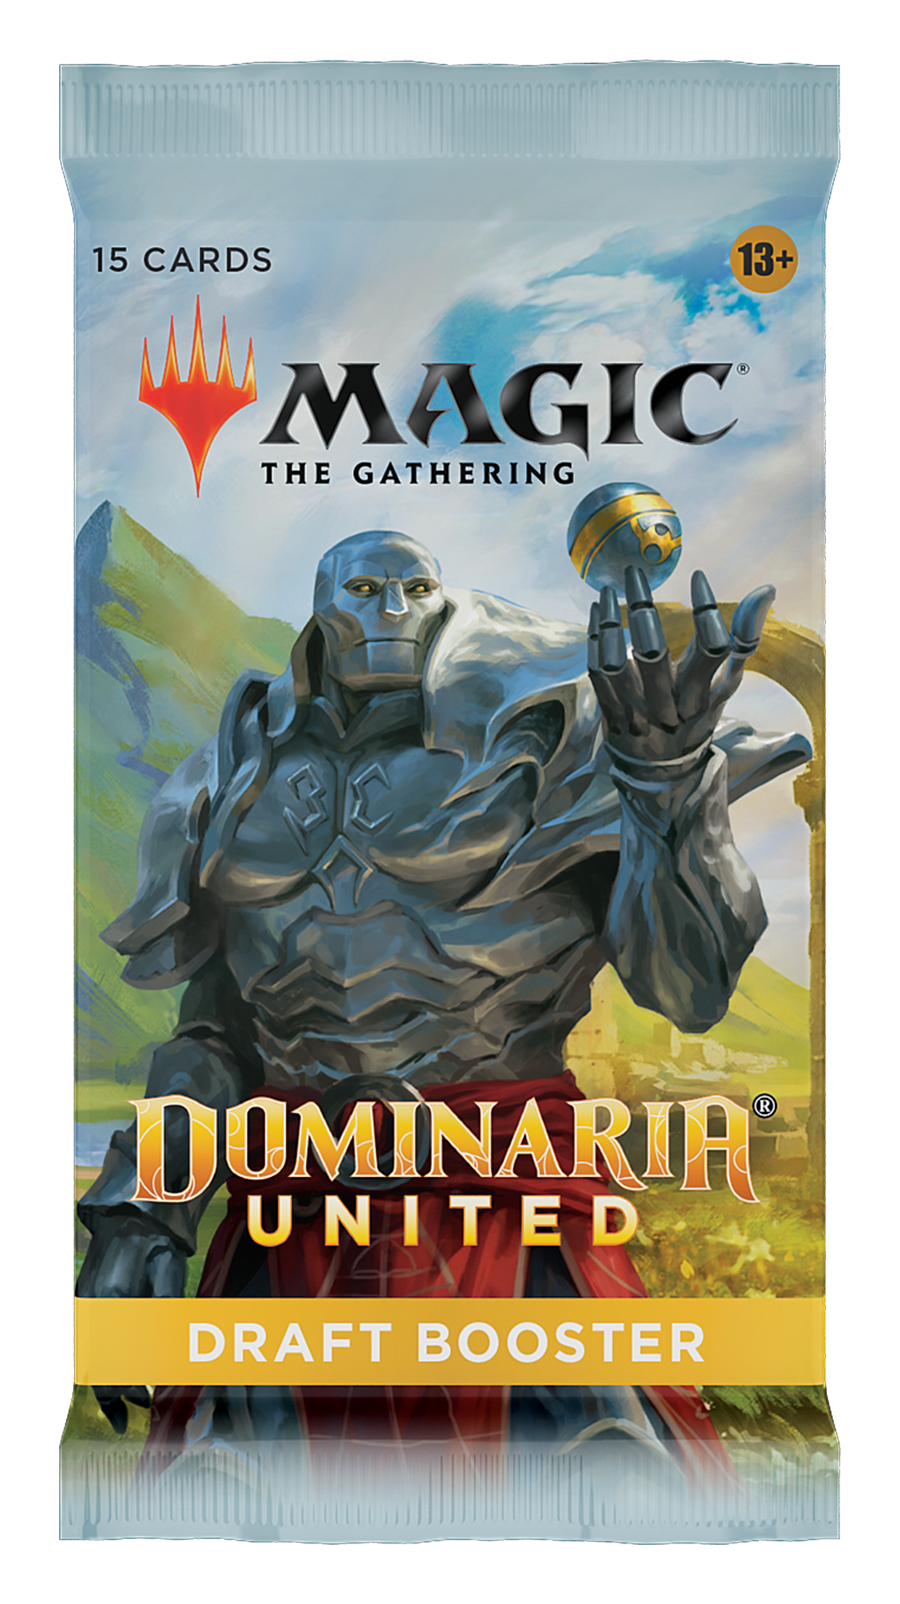 Magic: The Gathering Dominaria United Draft Booster | 15 Magic Cards